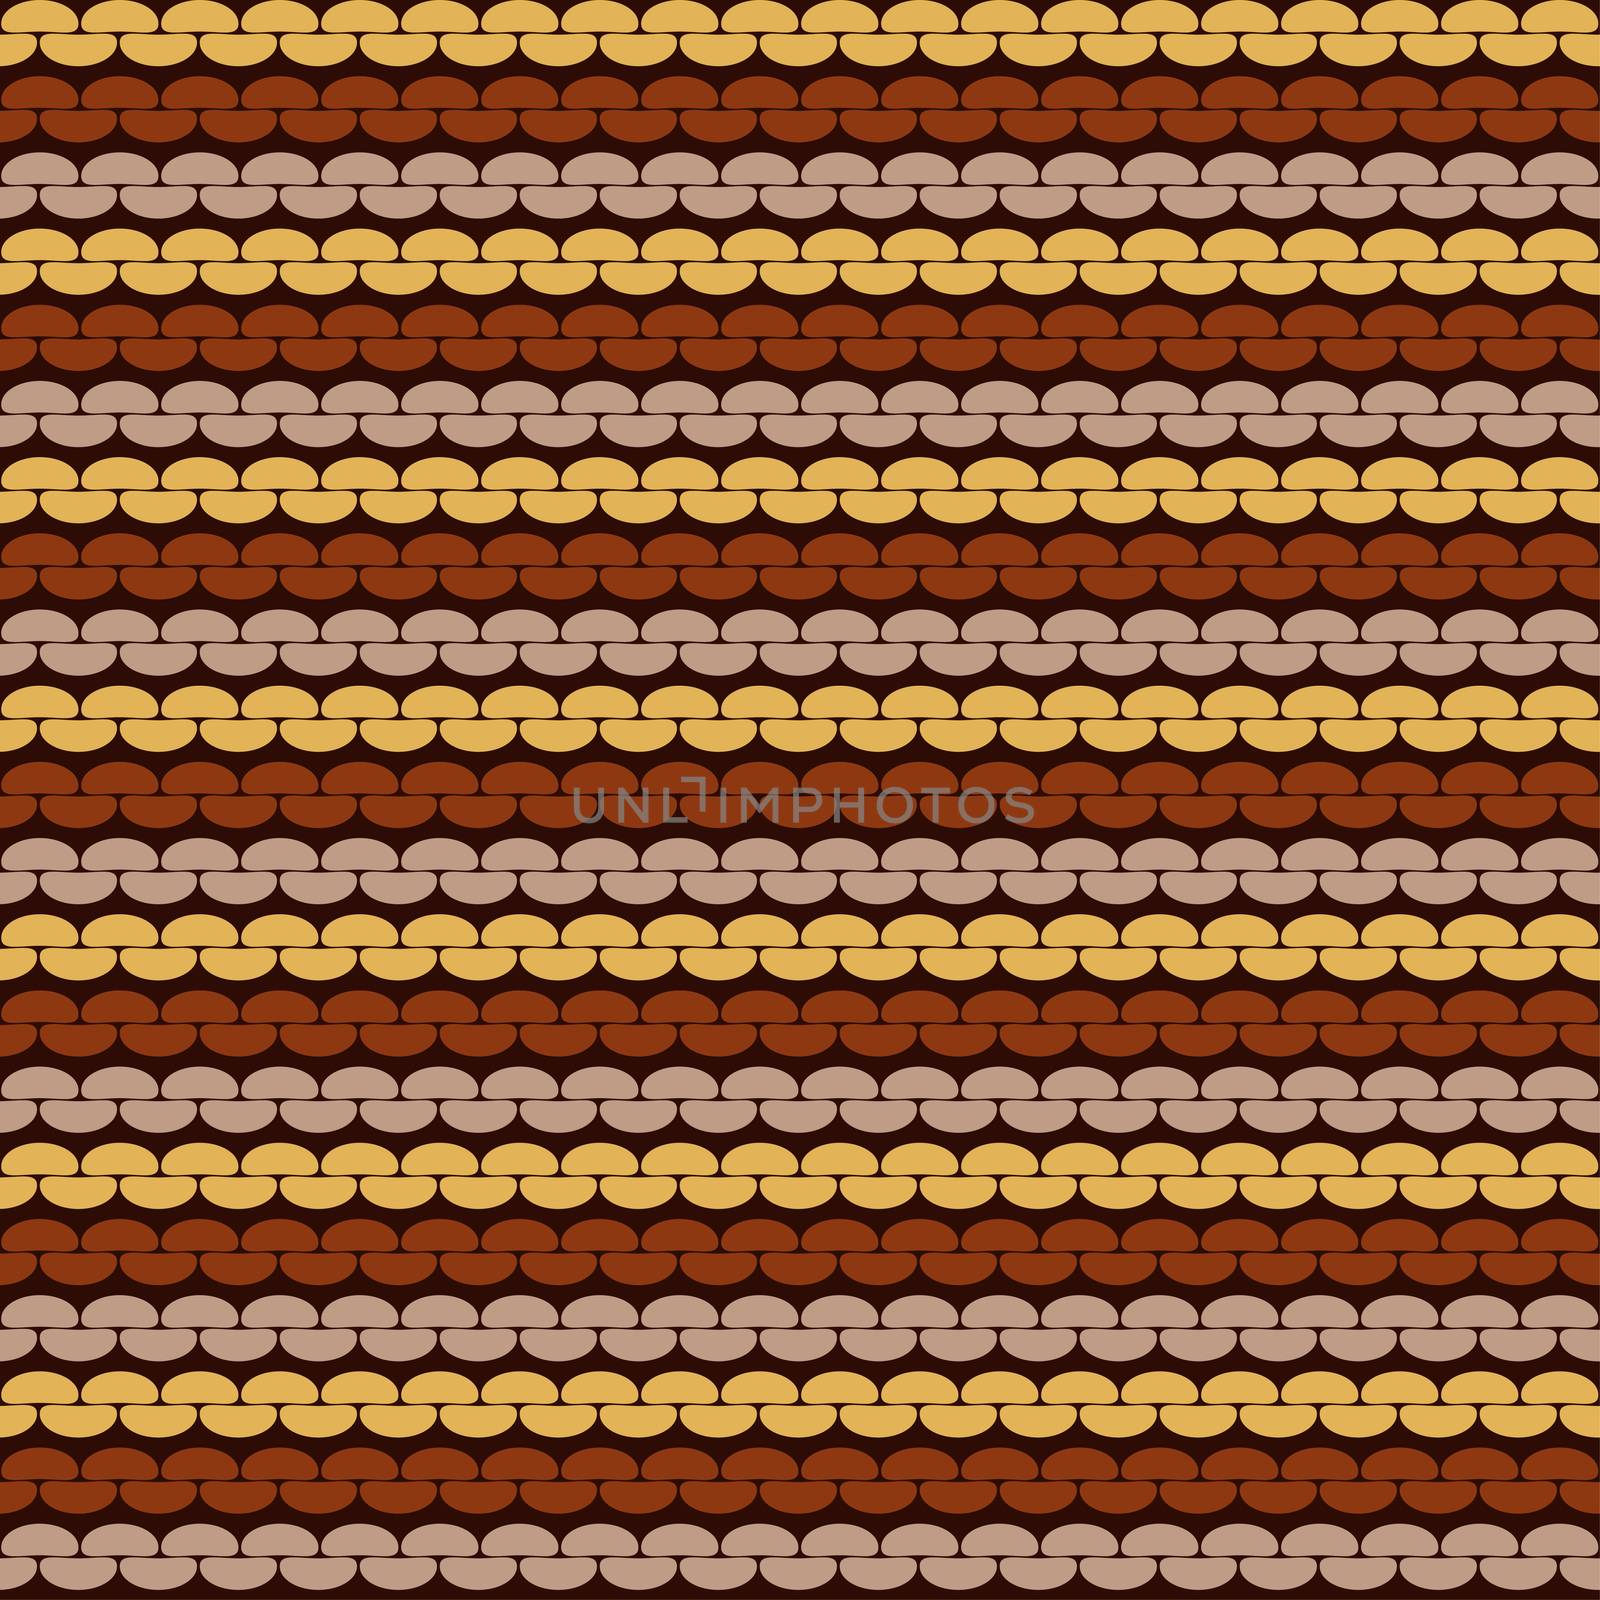 Seamless knitted background. Knitted realistic seamless pattern of brown color. Reverse side.